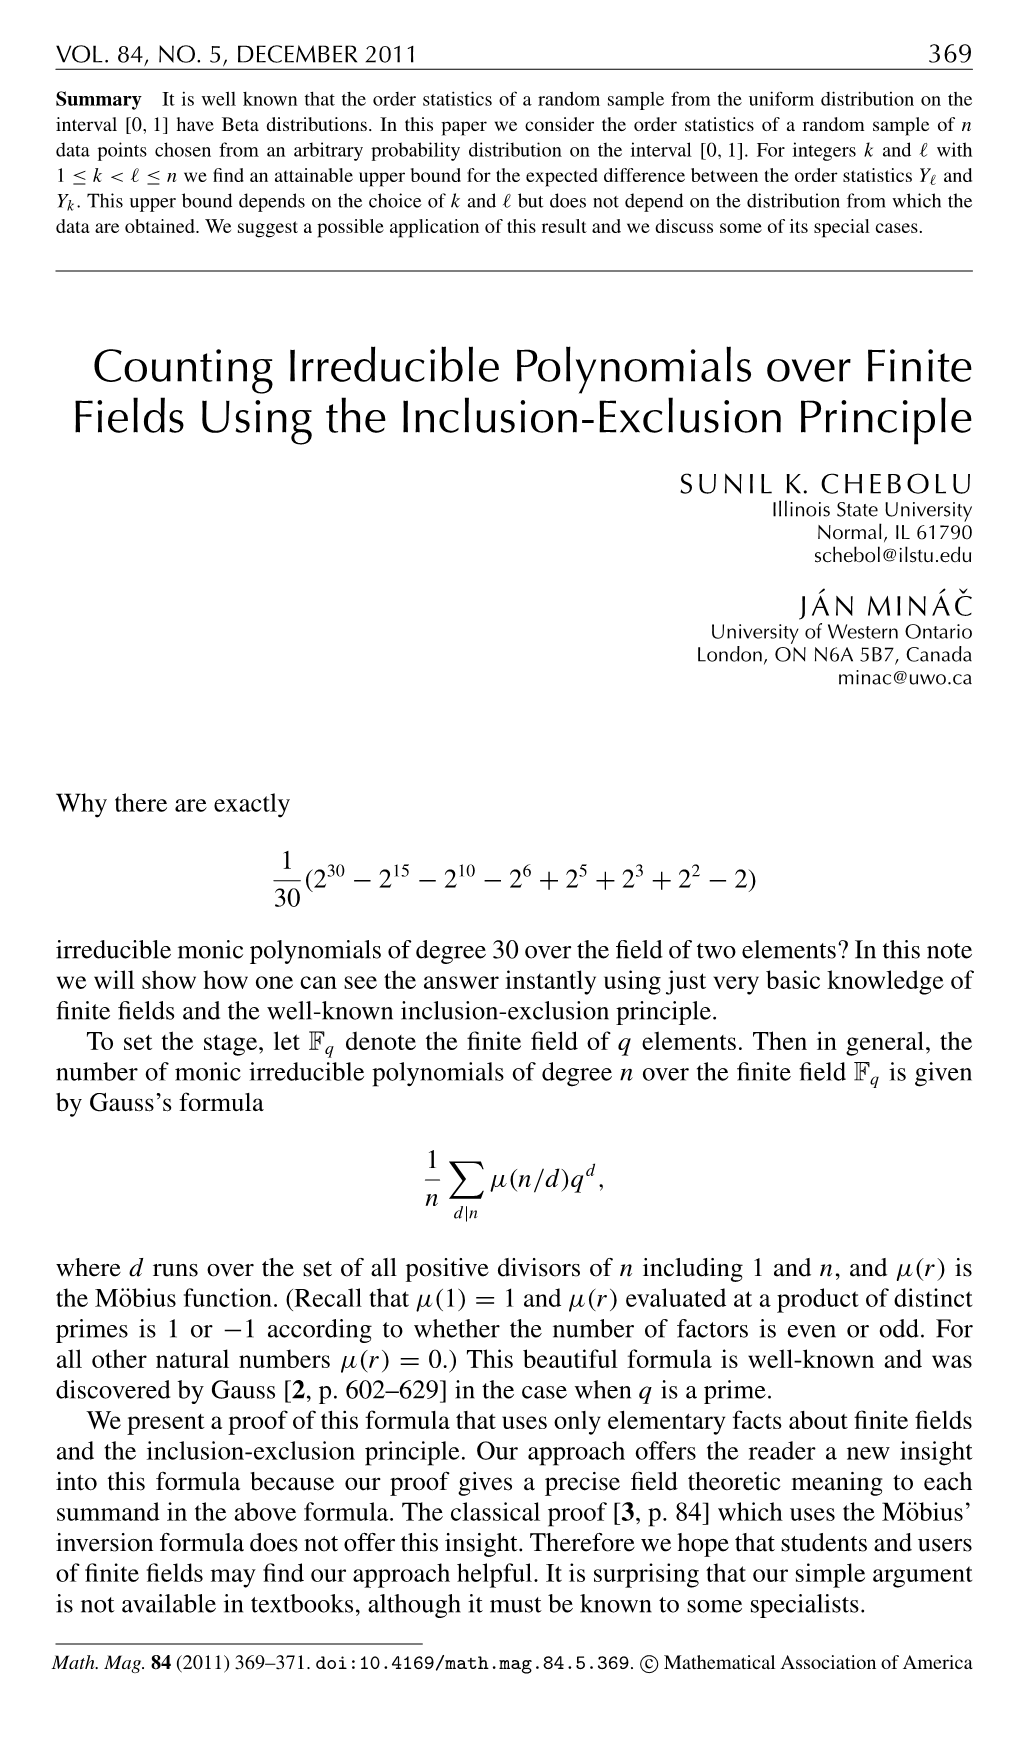 Counting Irreducible Polynomials Over Finite Fields Using the Inclusion-Exclusion Principle